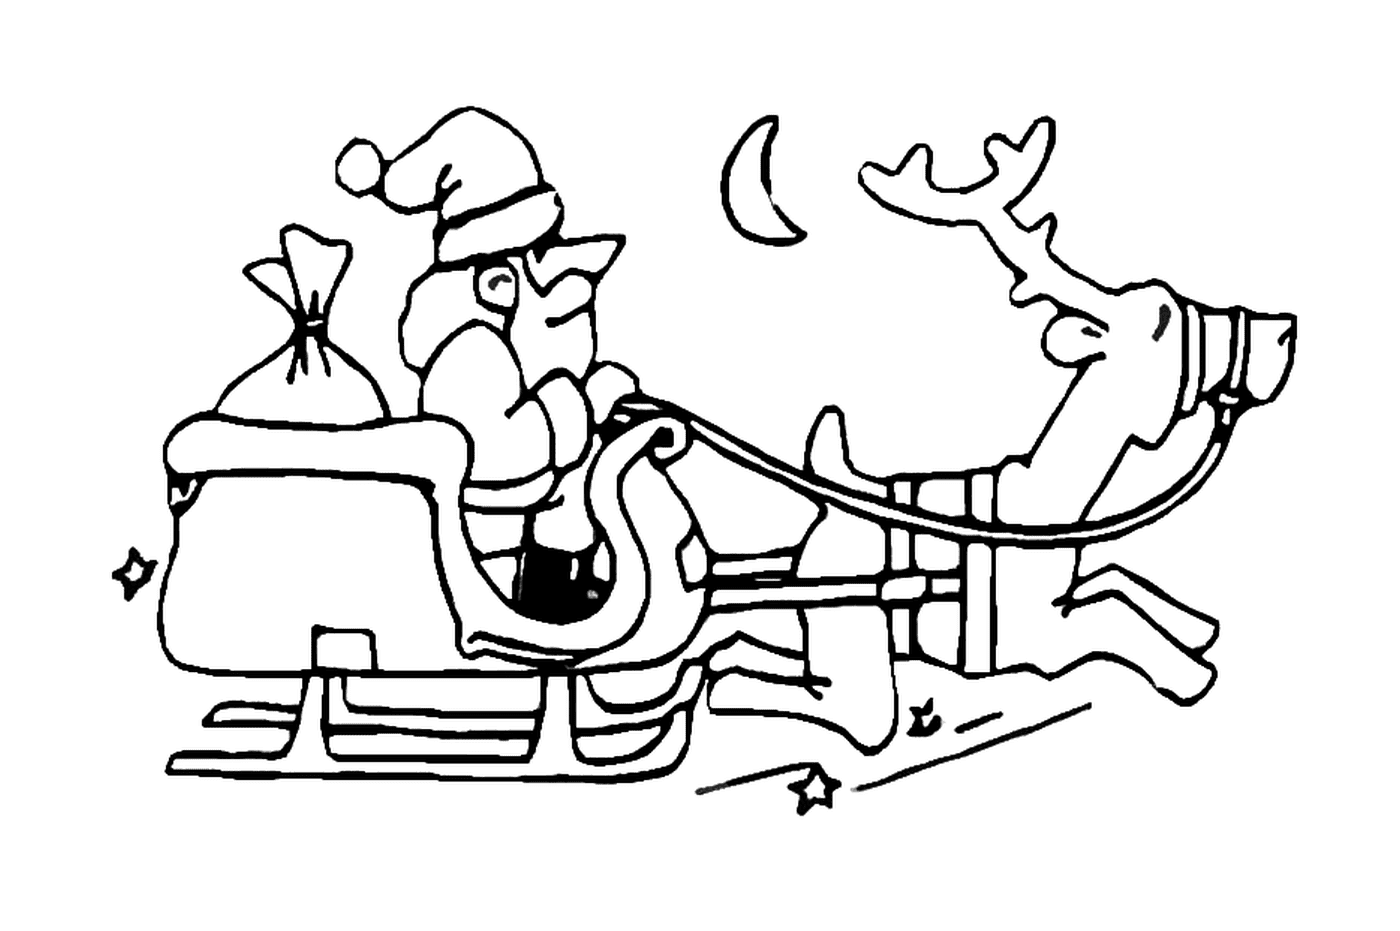  Santa with her sled 